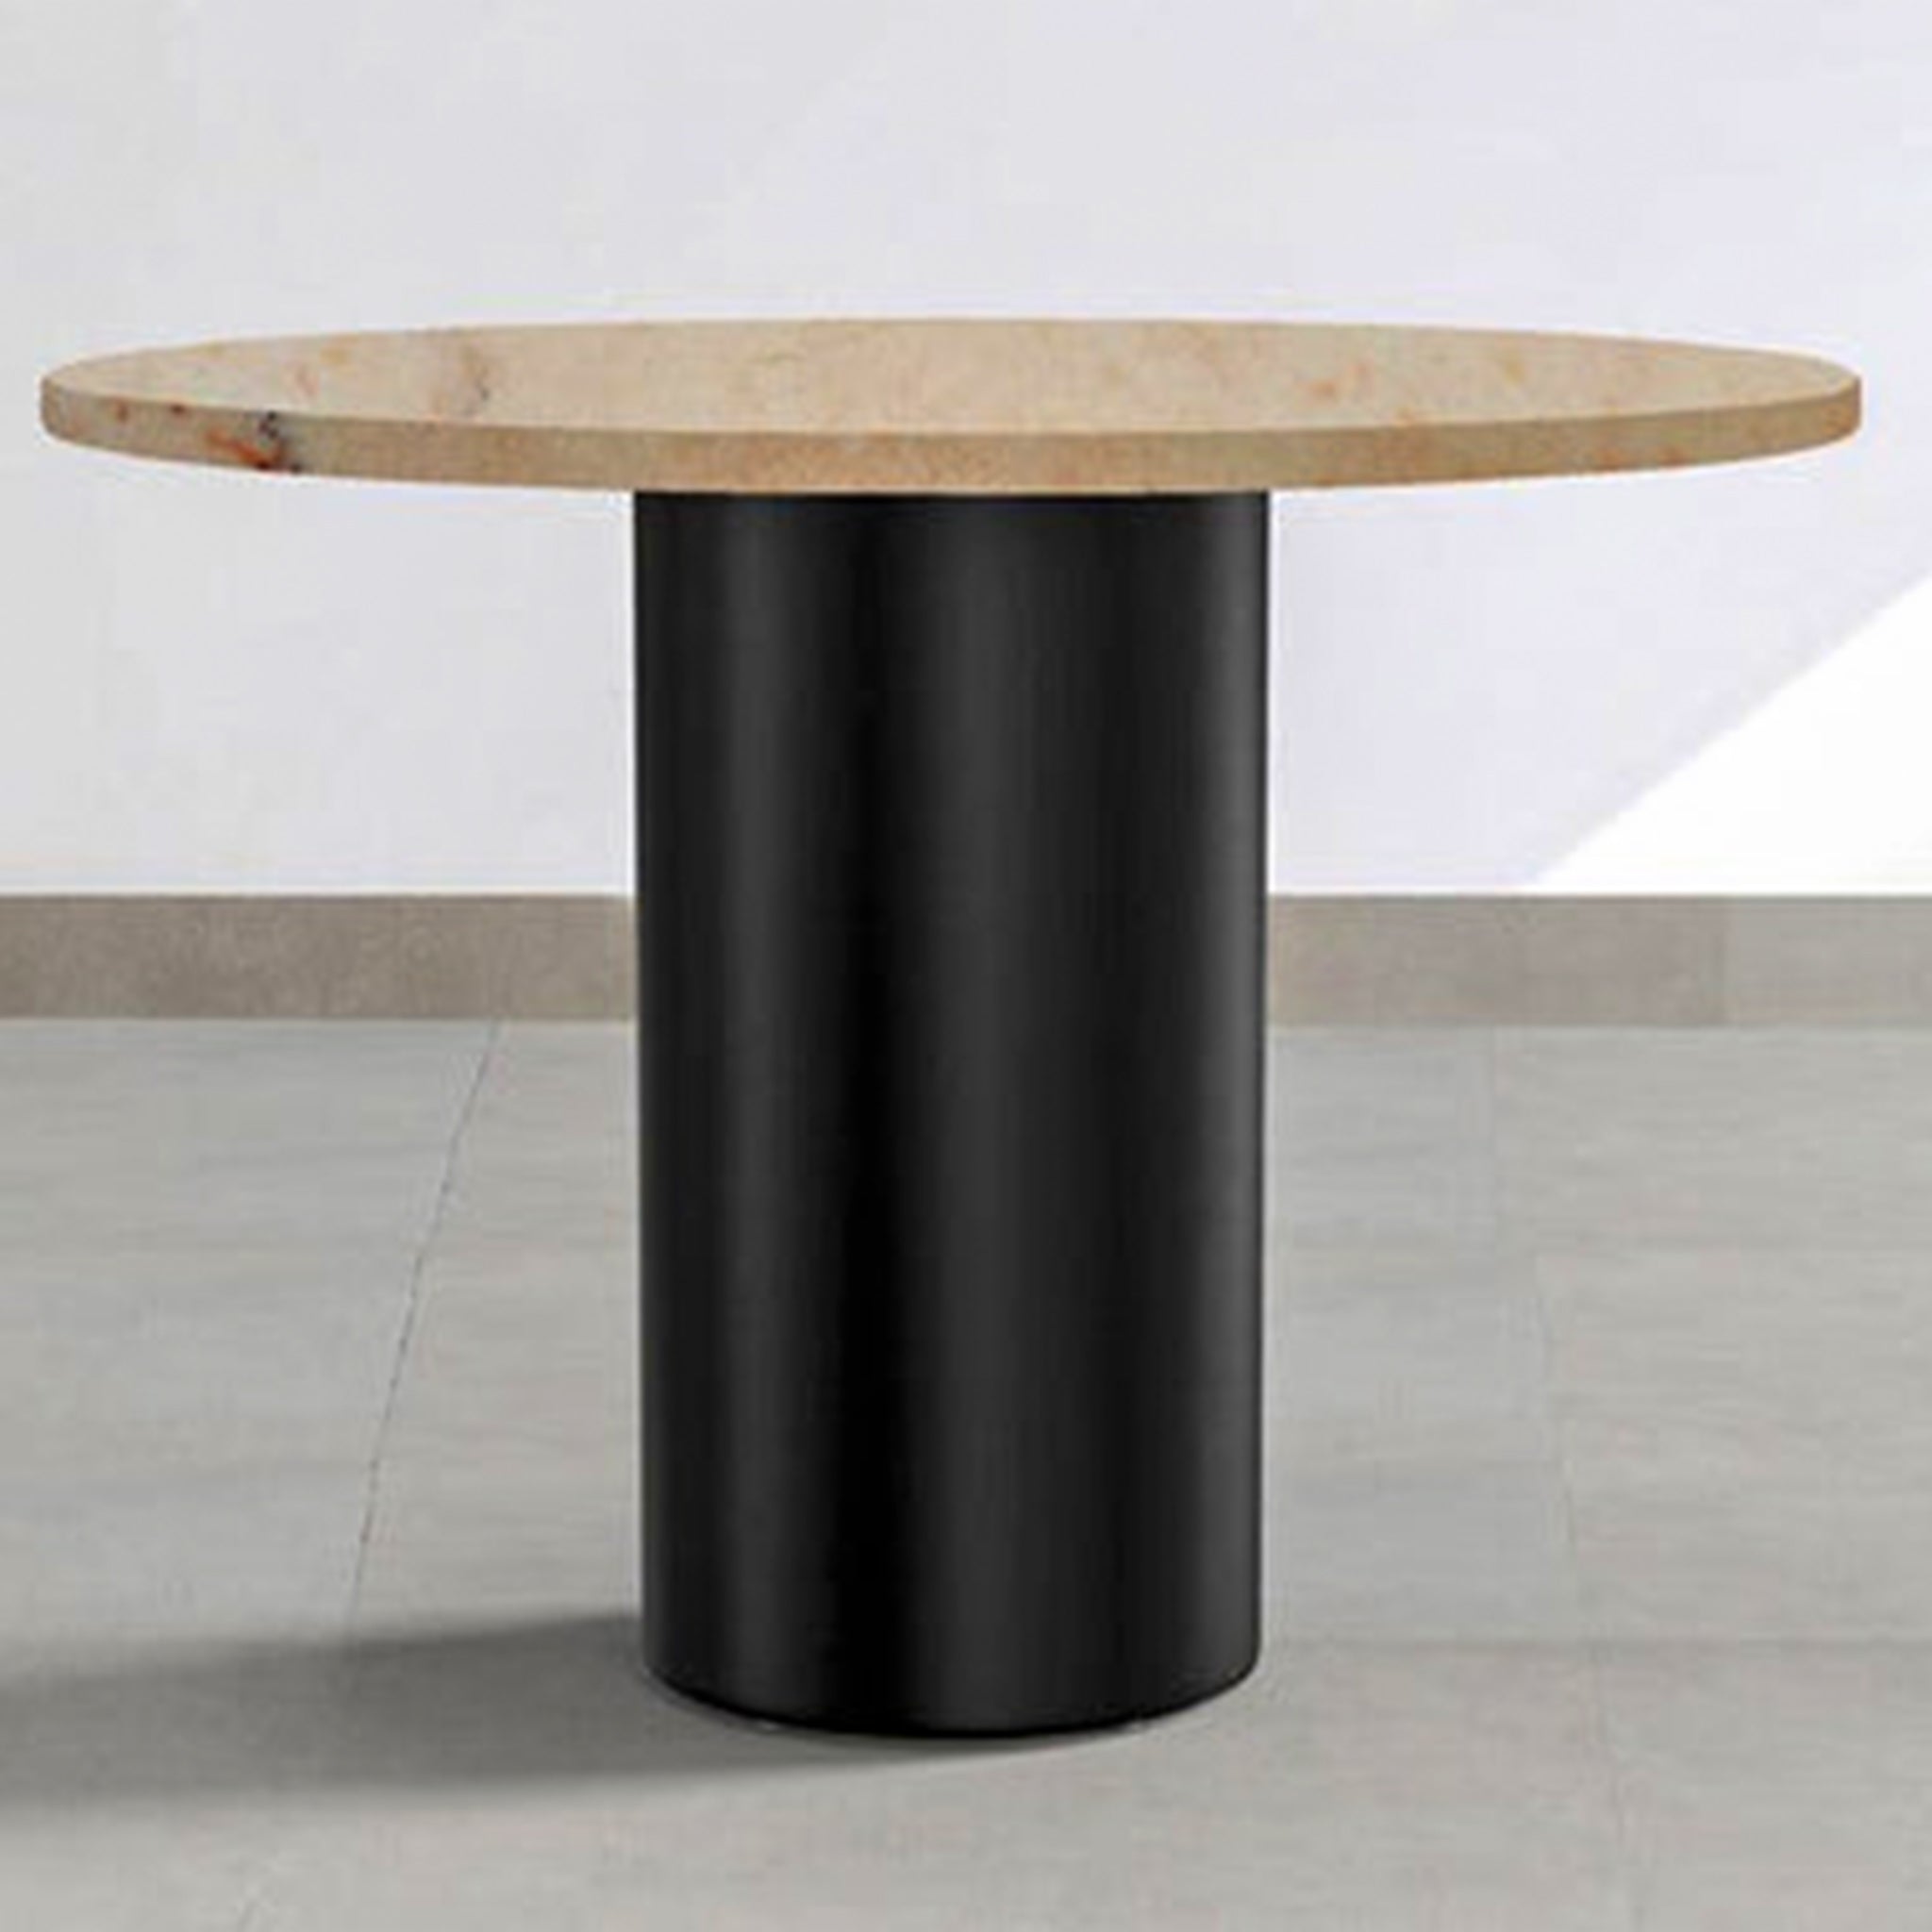 Scandinavian beside table with light wood and clean lines.